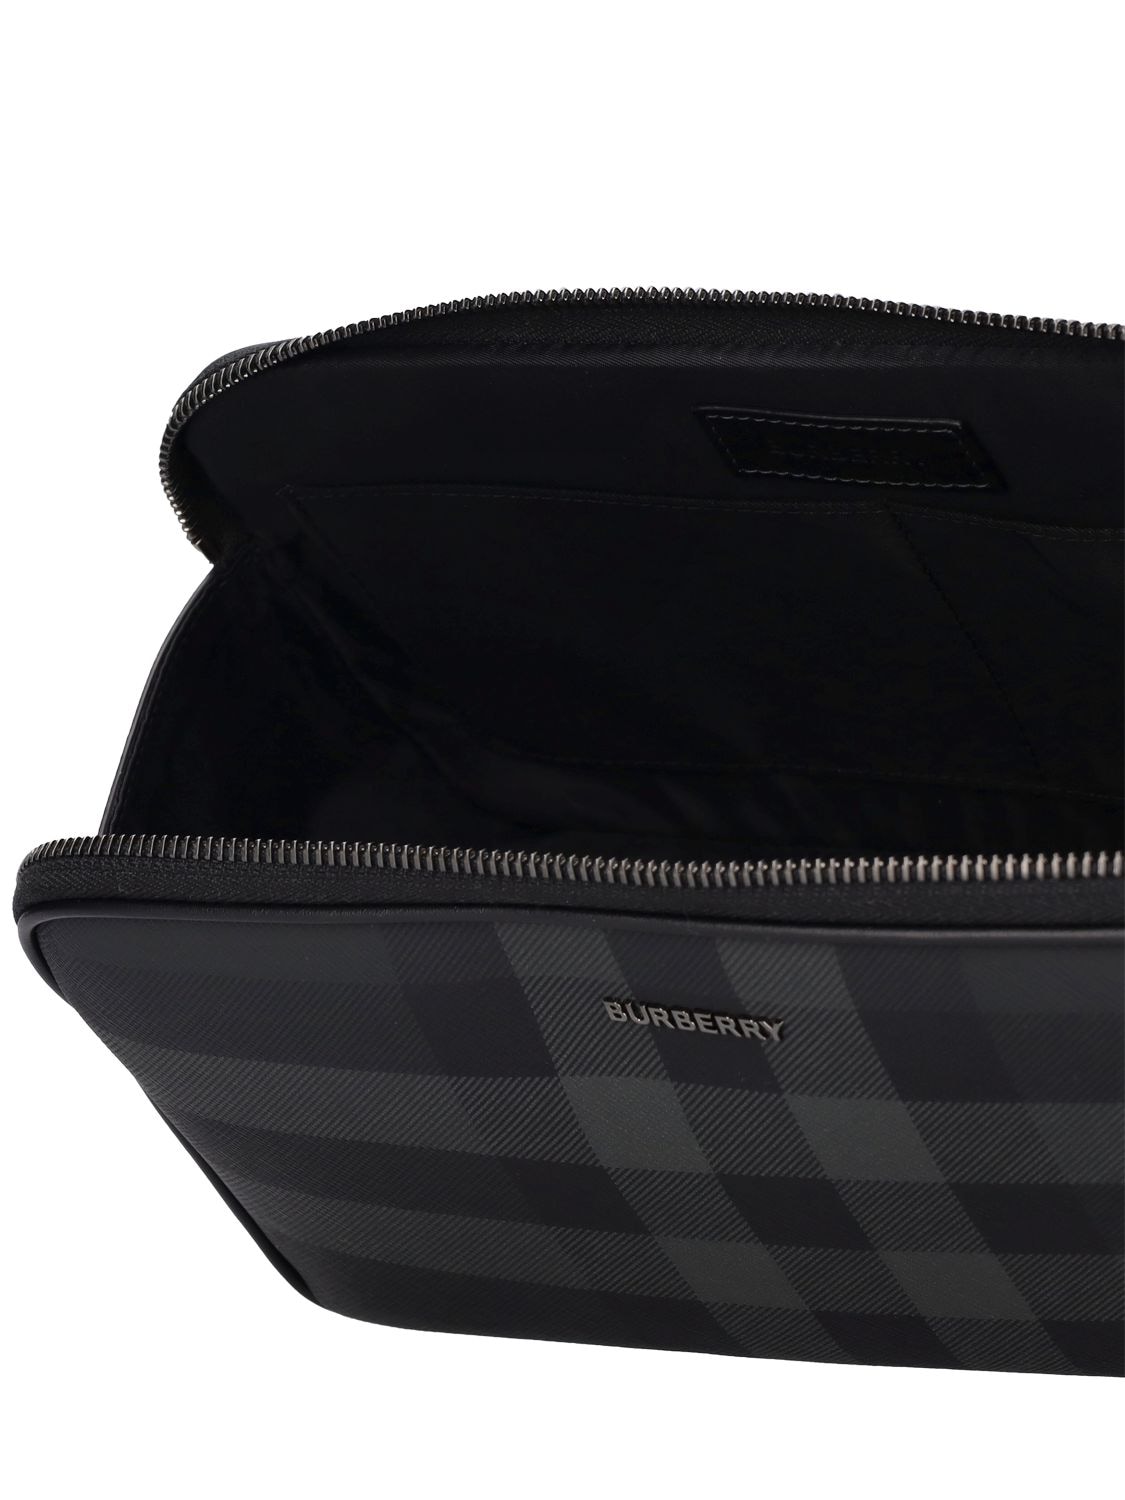 Shop Burberry Check Printed Toiletry Bag In Charcoal